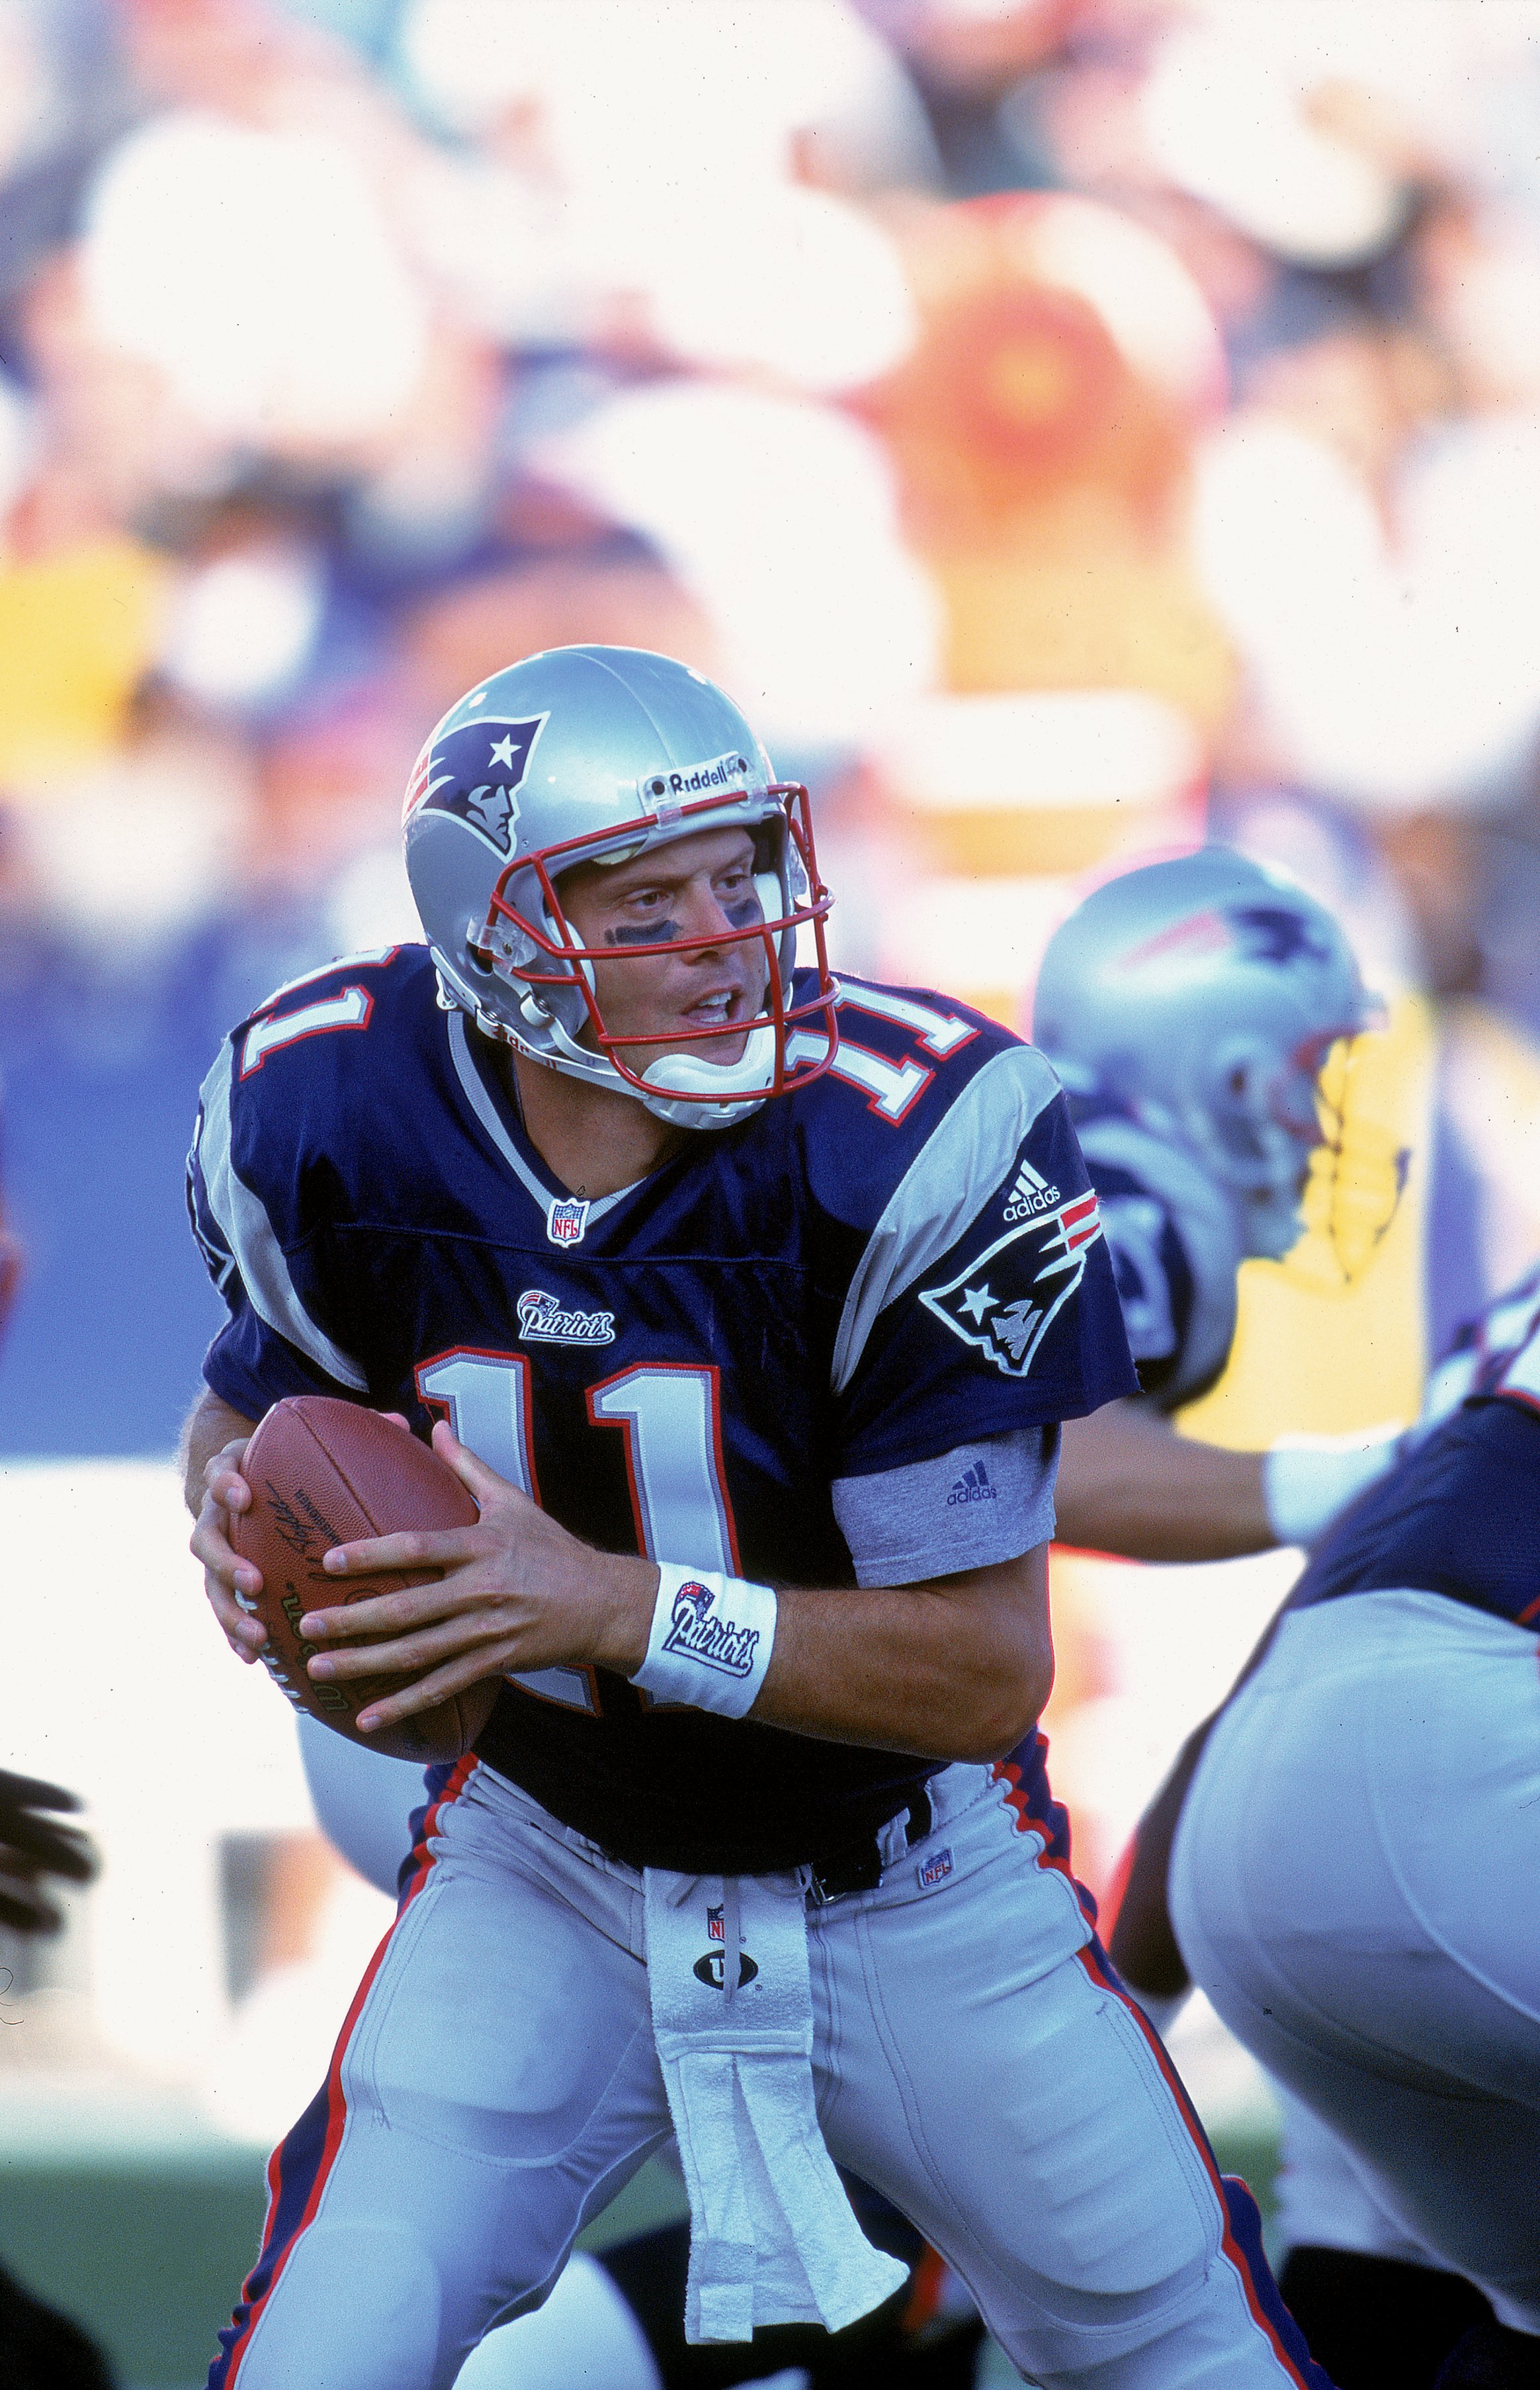 A Statistical Approach: 30 Greatest Quarterbacks in NFL History